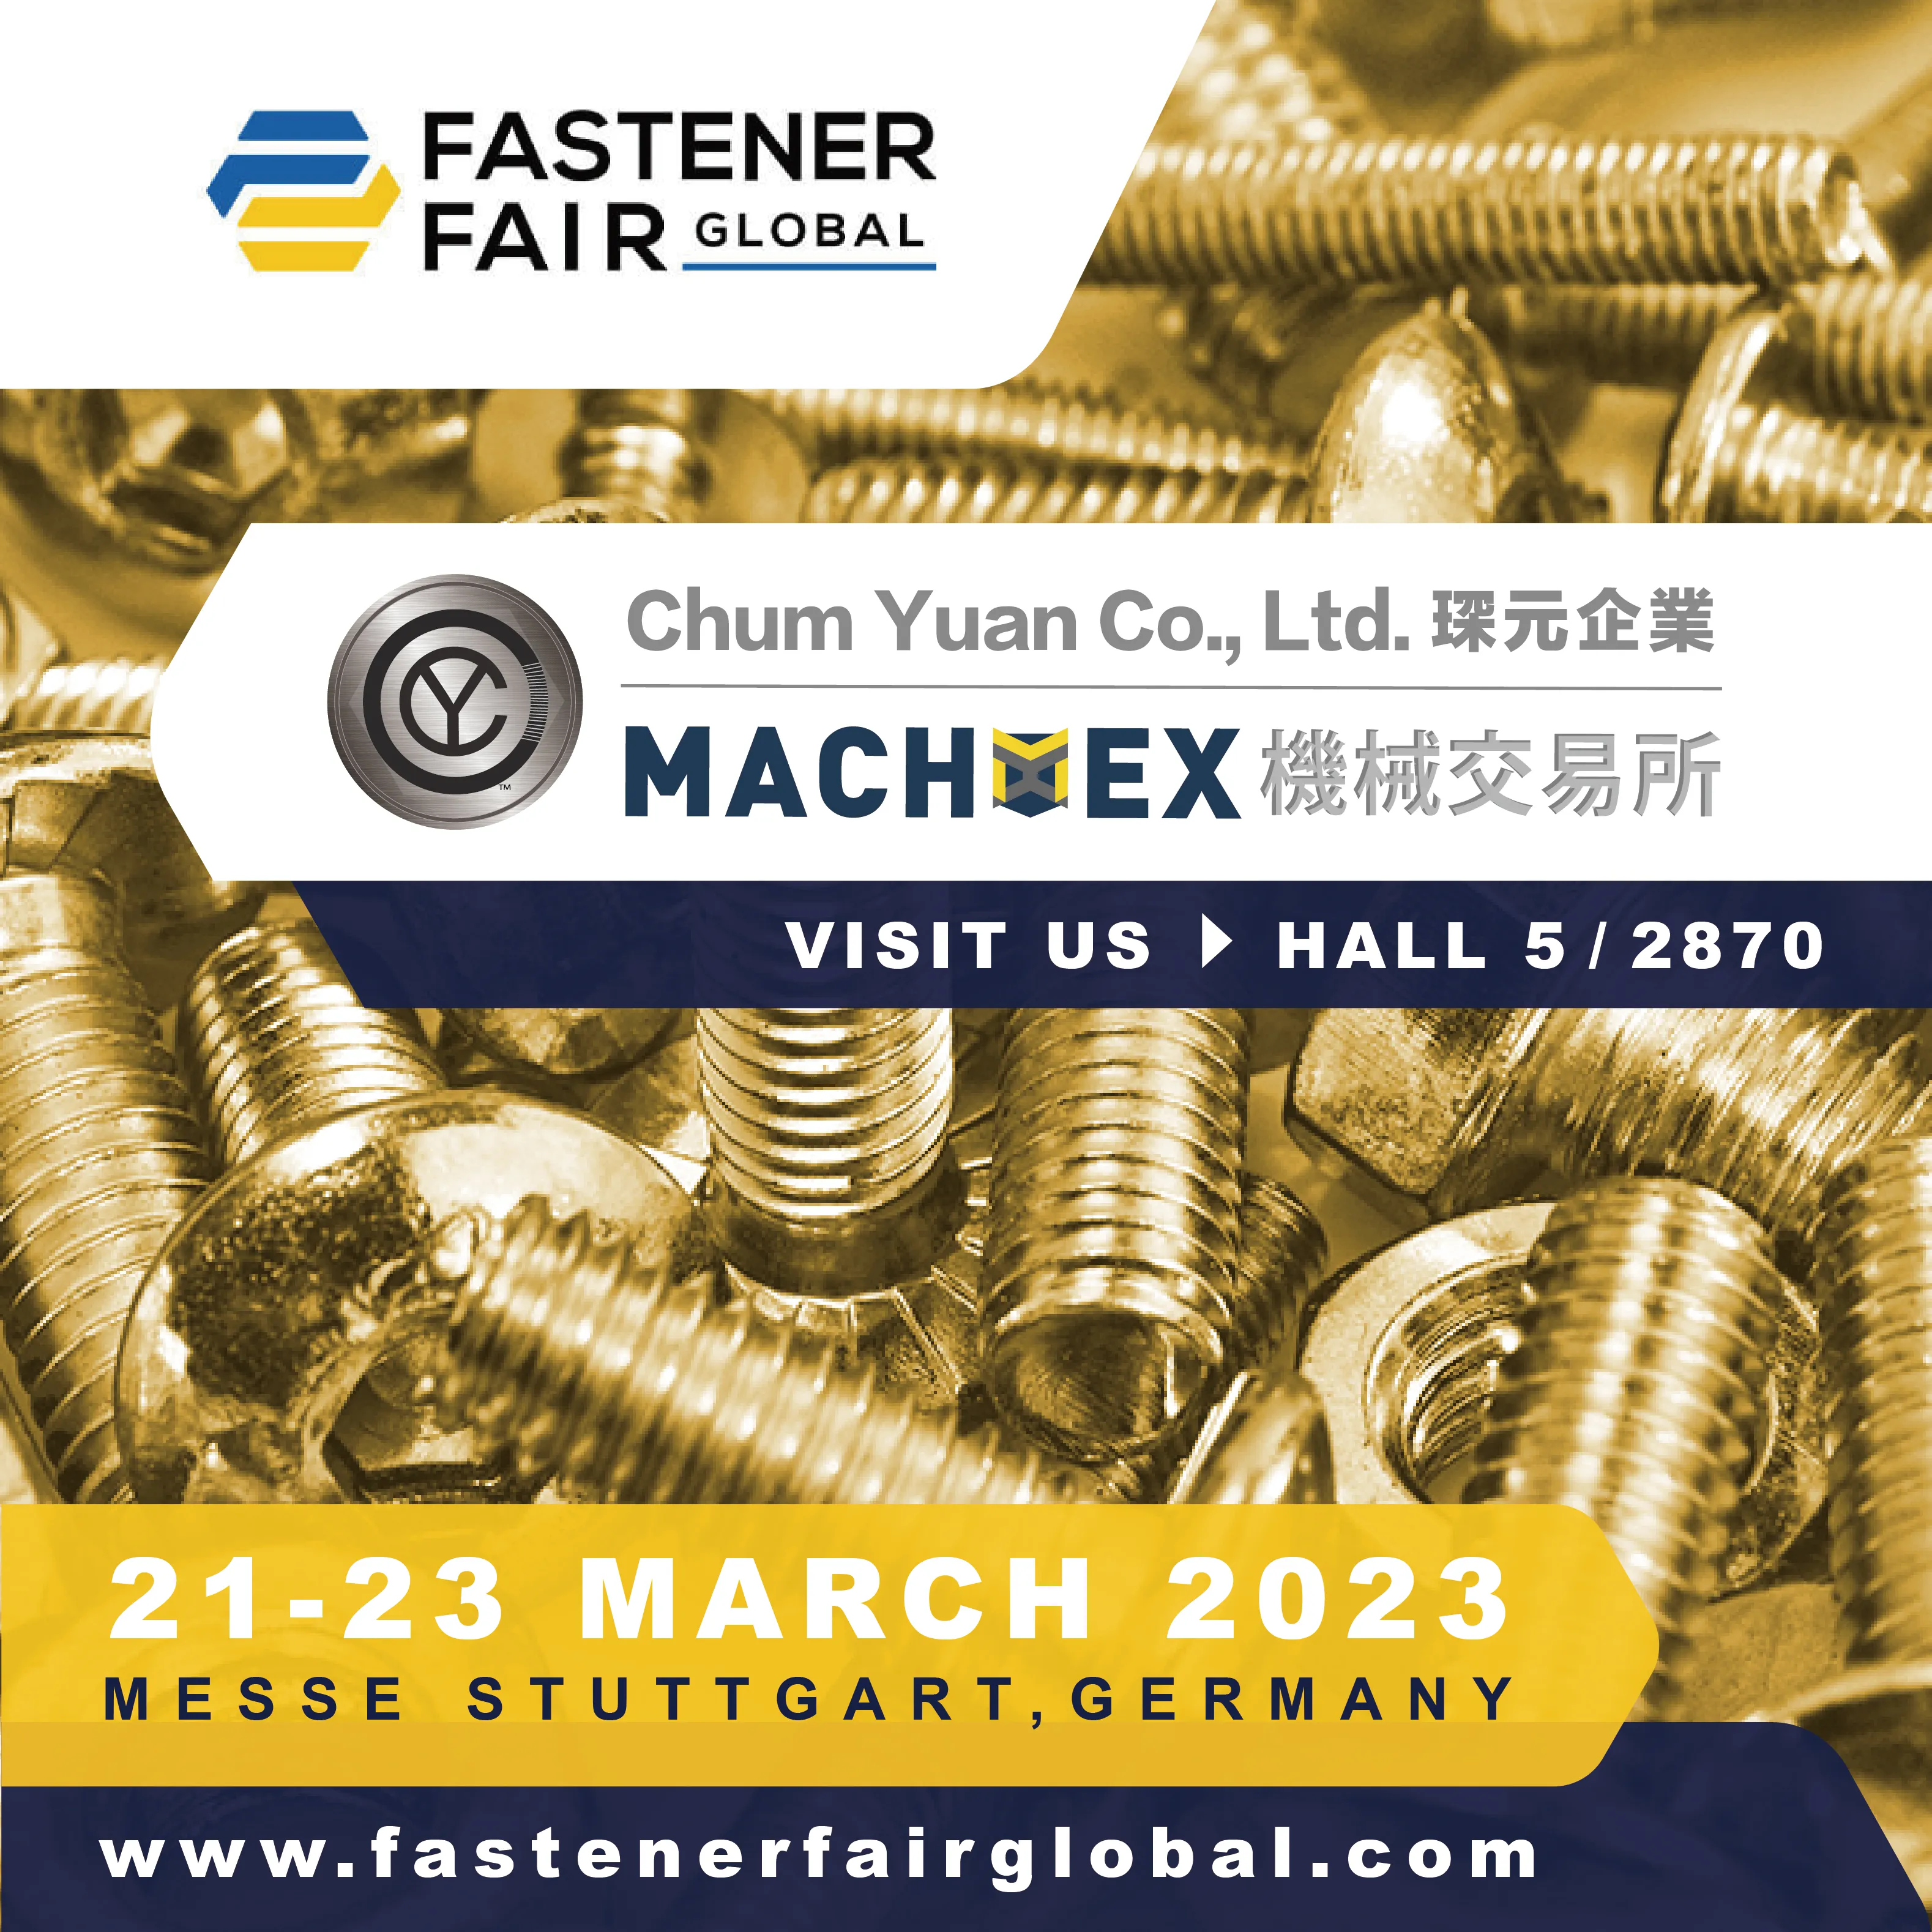 2023.03.03 We are going to Fastener Industry in Germany